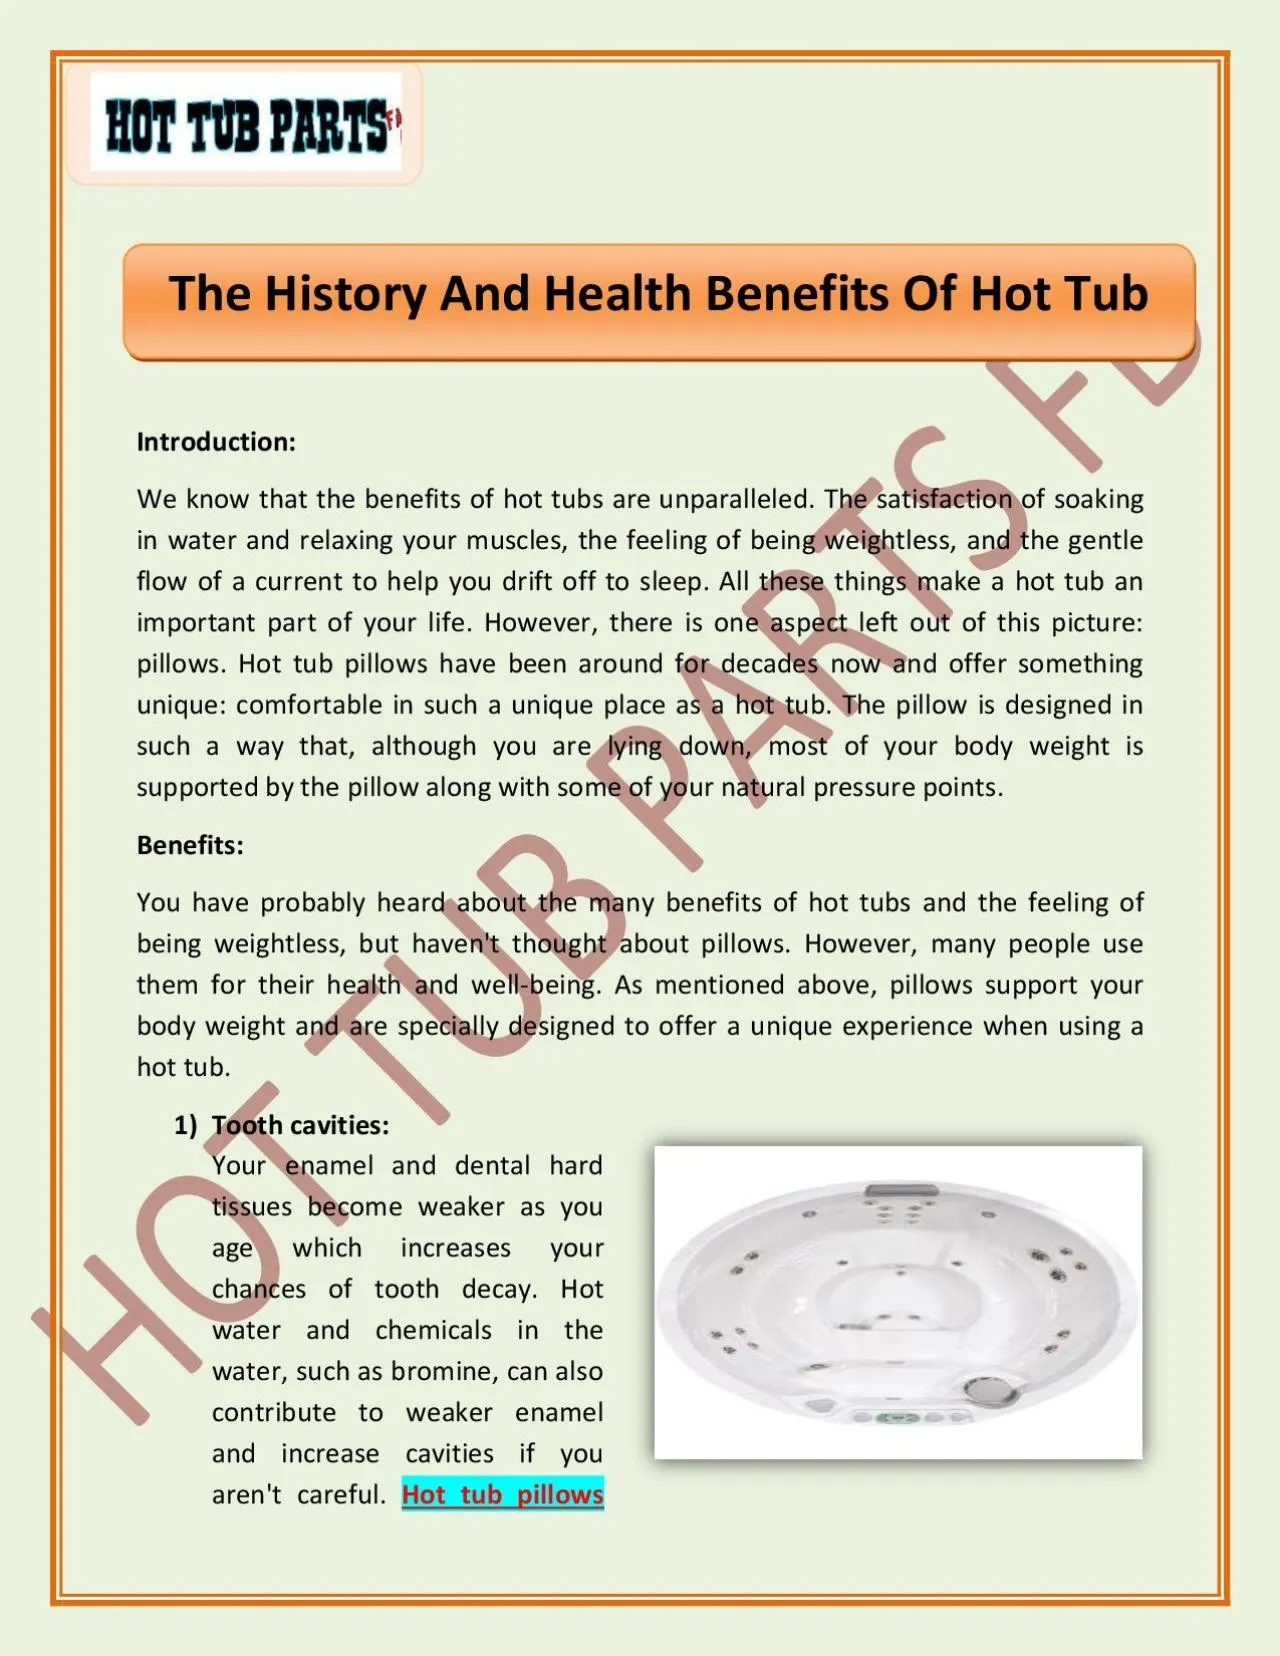 The History And Health Benefits Of Hot Tub